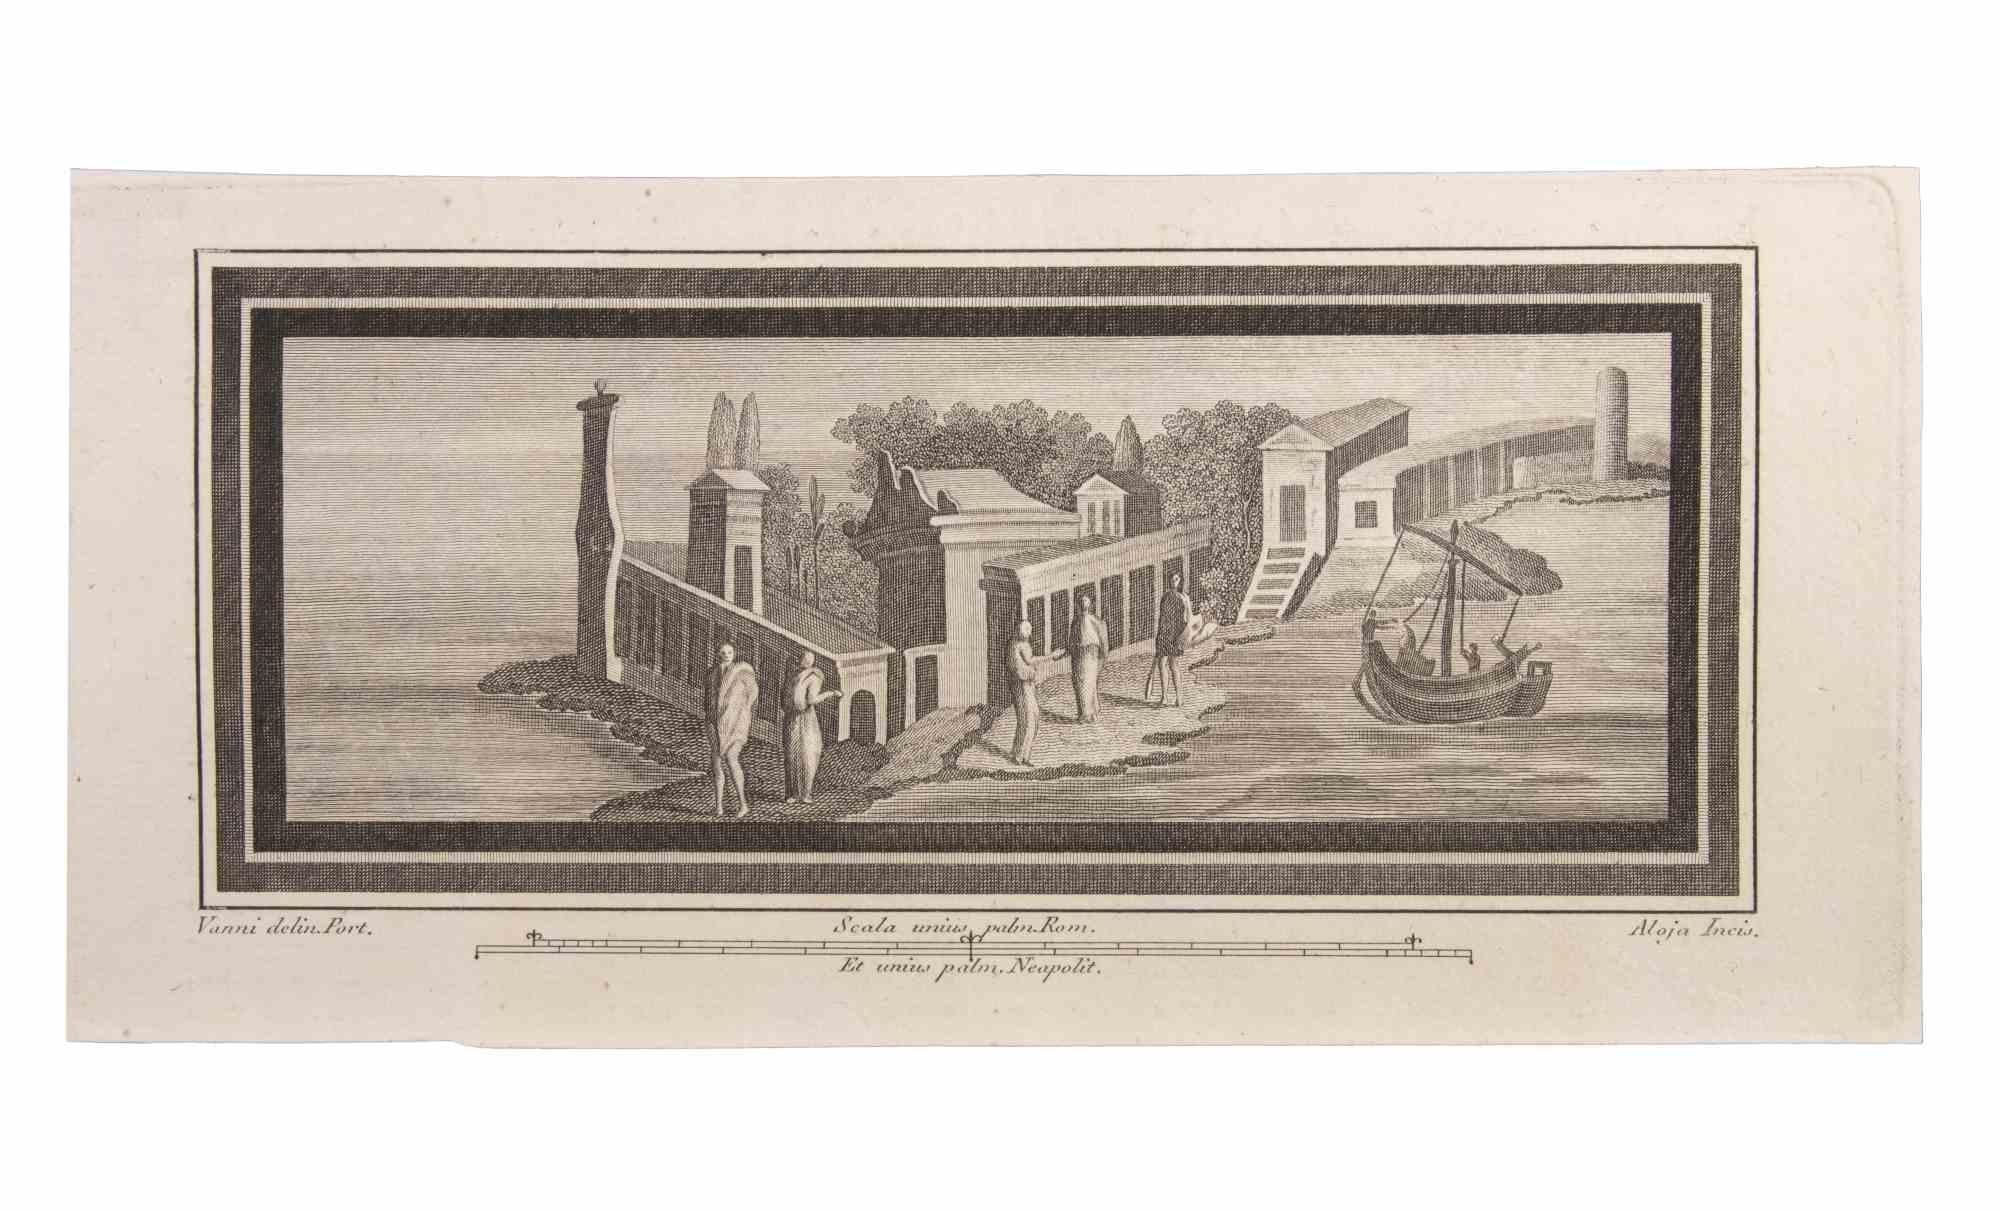 Seascapes With Monuments and Figures is an Etching realized by  Luigi Aloja (1783-1837).

The etching belongs to the print suite “Antiquities of Herculaneum Exposed” (original title: “Le Antichità di Ercolano Esposte”), an eight-volume volume of